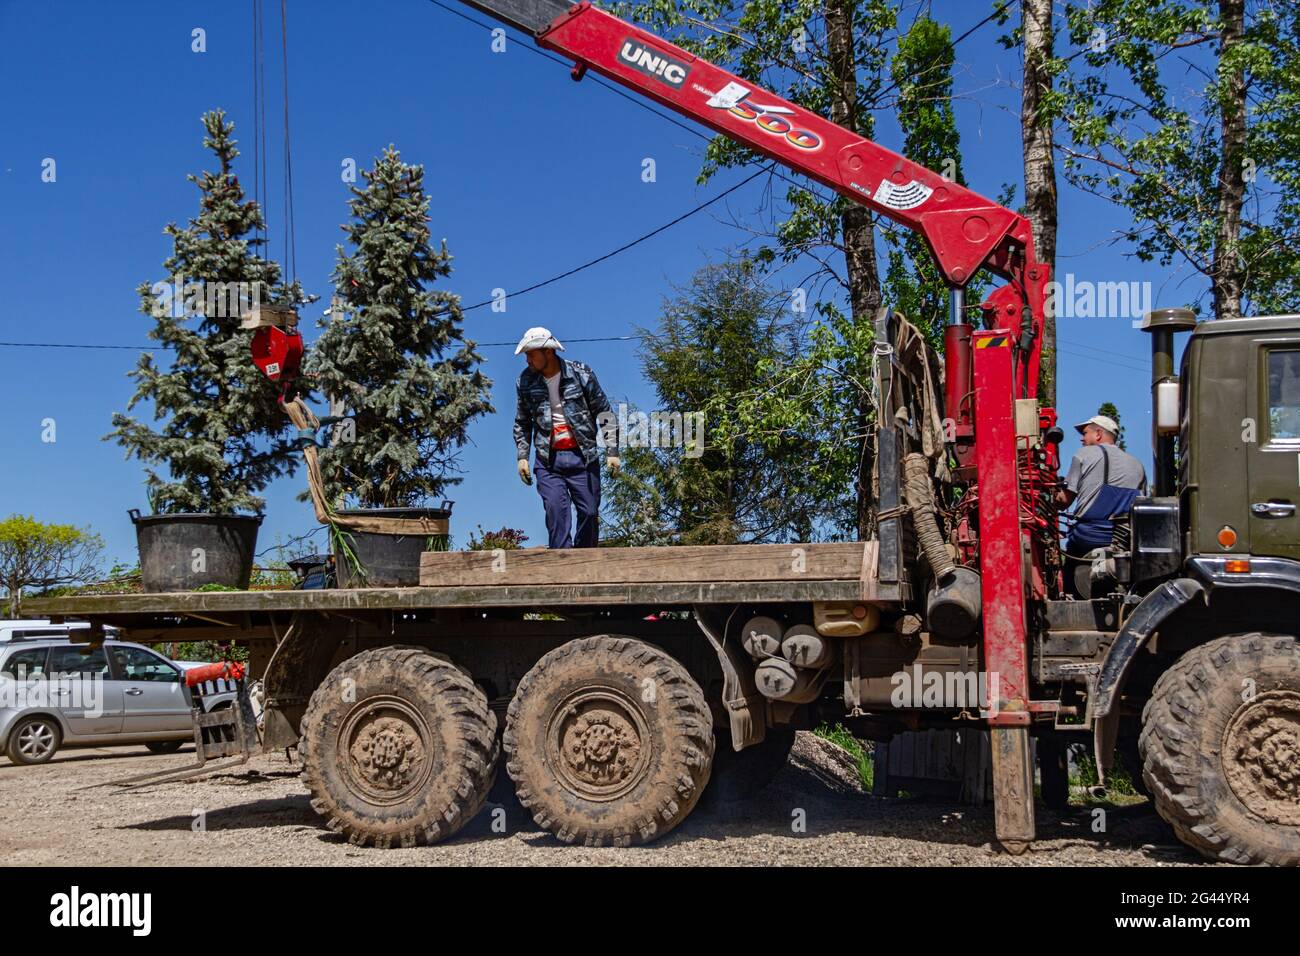 Moscow region, Russia, June 05, 2021 Workers load small conifers onto a truck to deliver them to a customer. Sale of seedlings from the nursery. Stock Photo